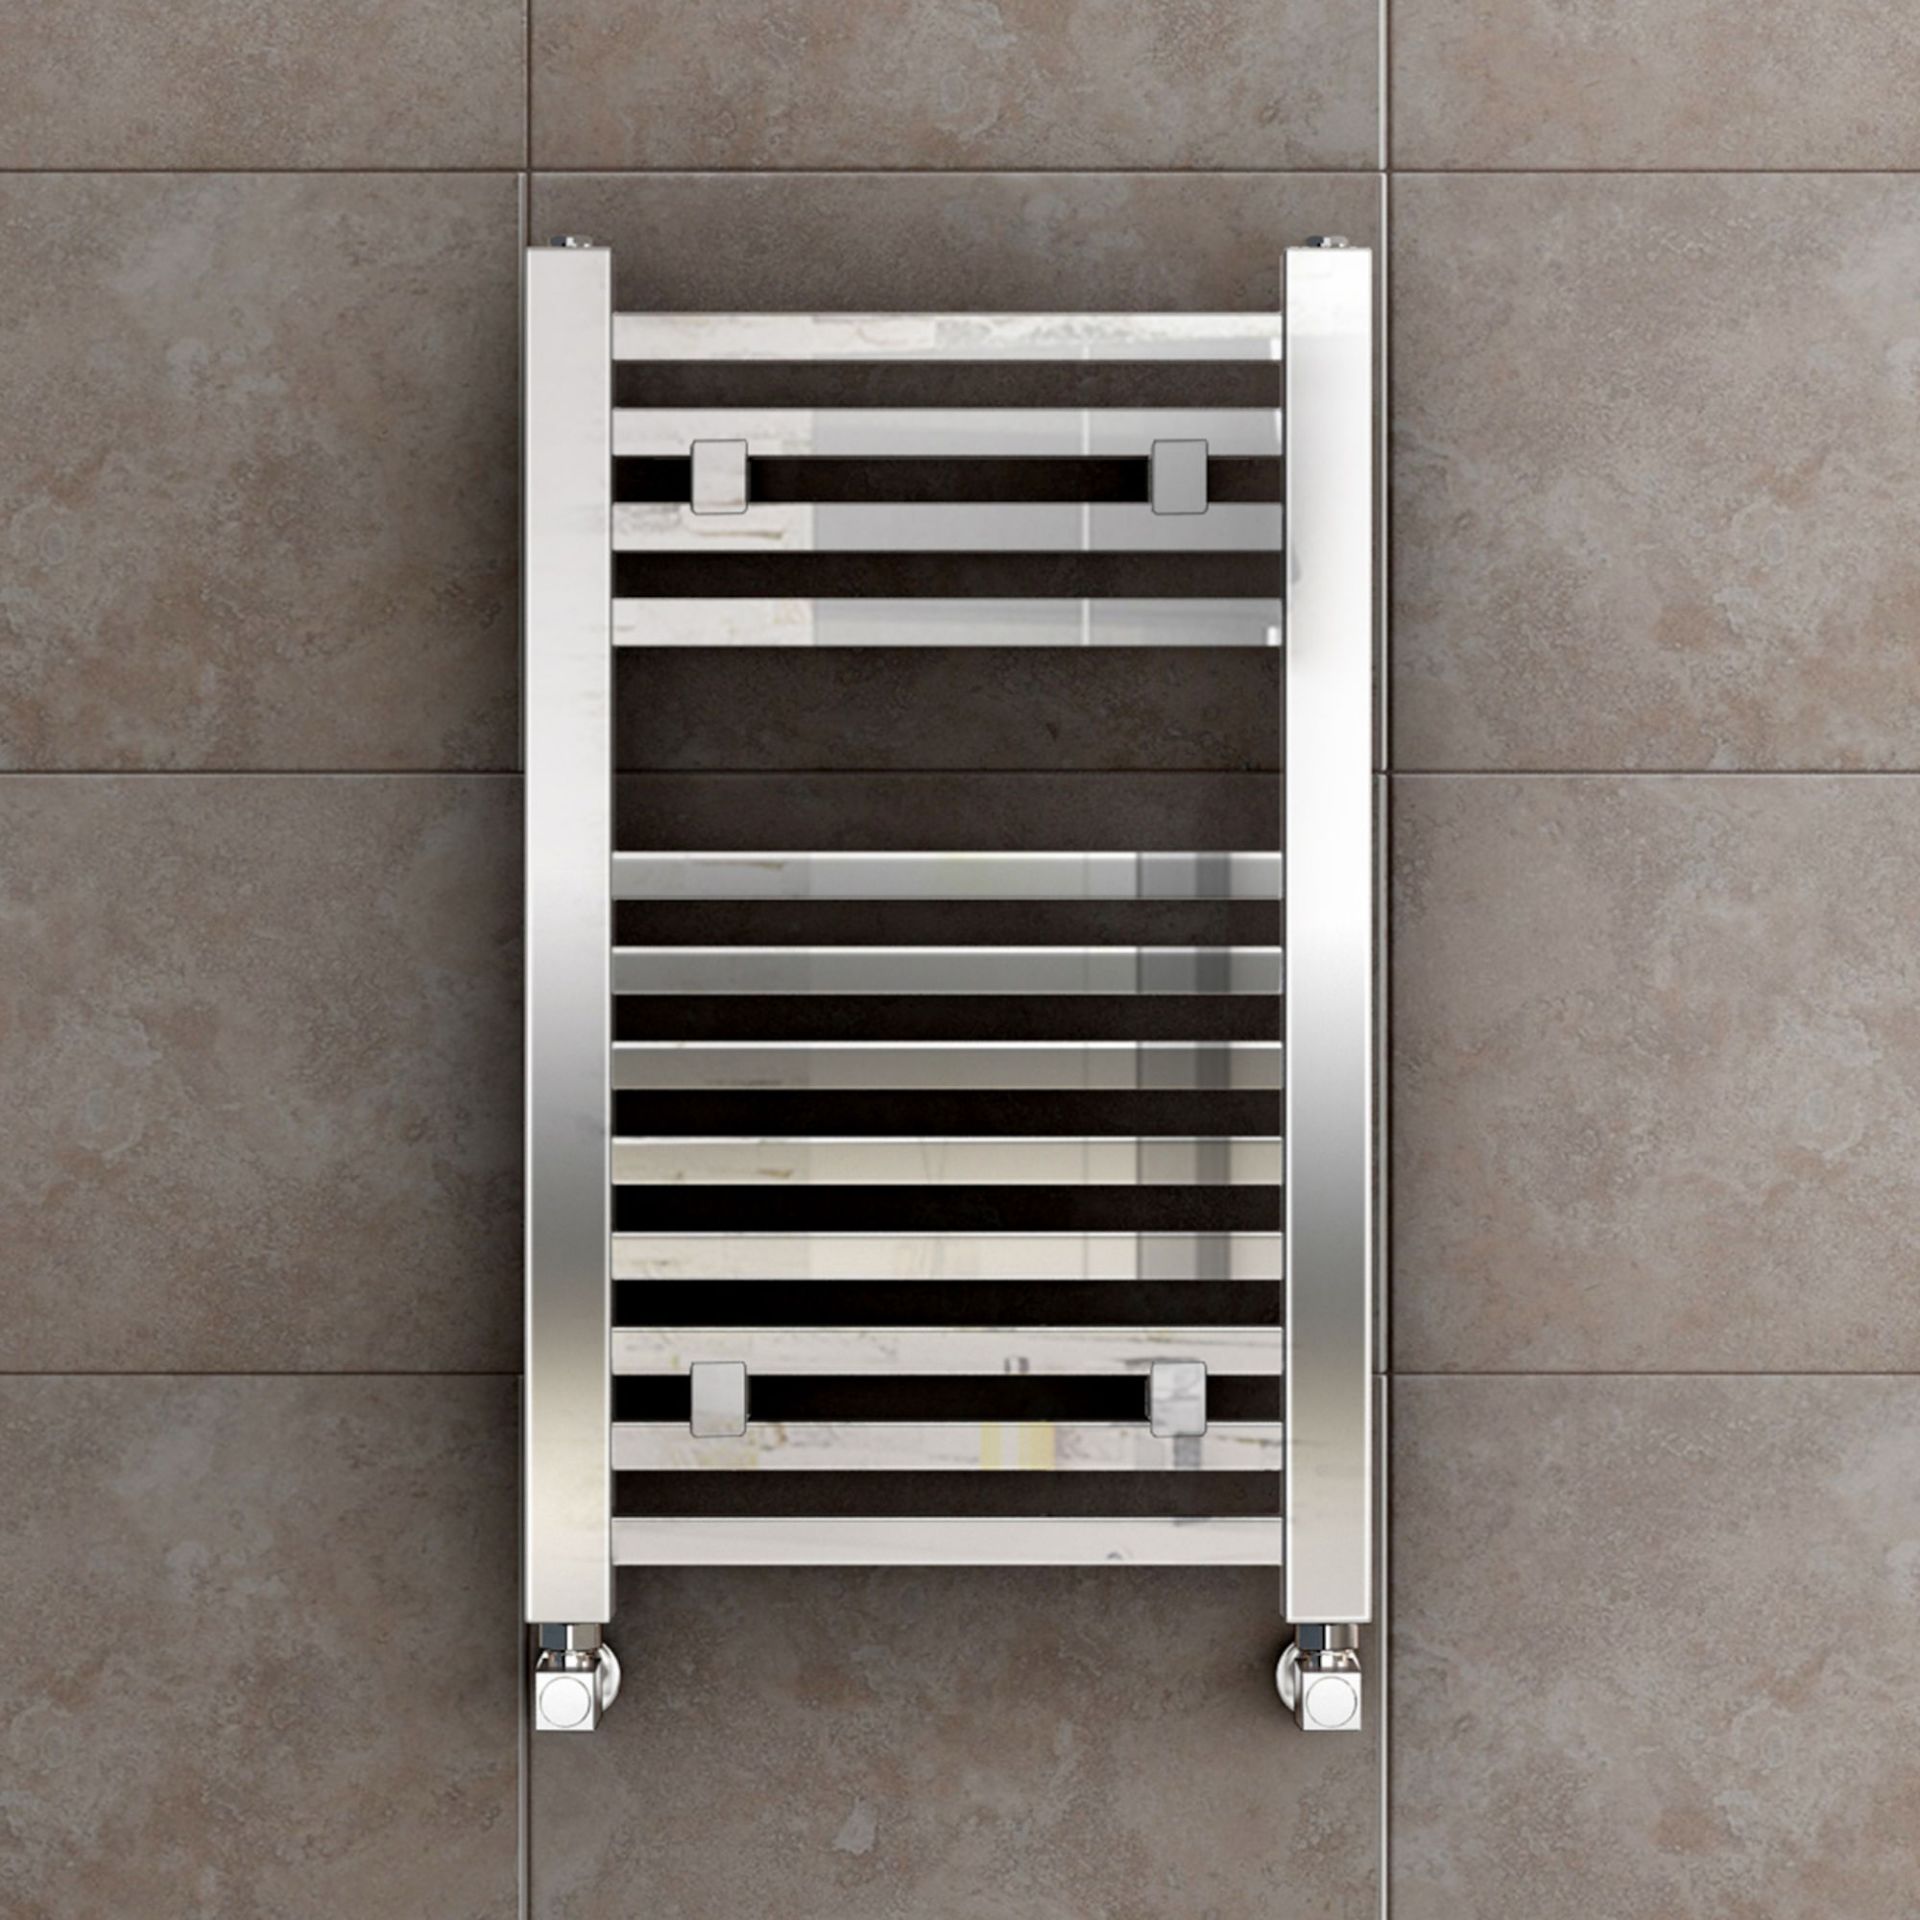 (MW13) 650x400mm Chrome Square Rail Ladder Towel Radiator. Made from low carbon steel with a high